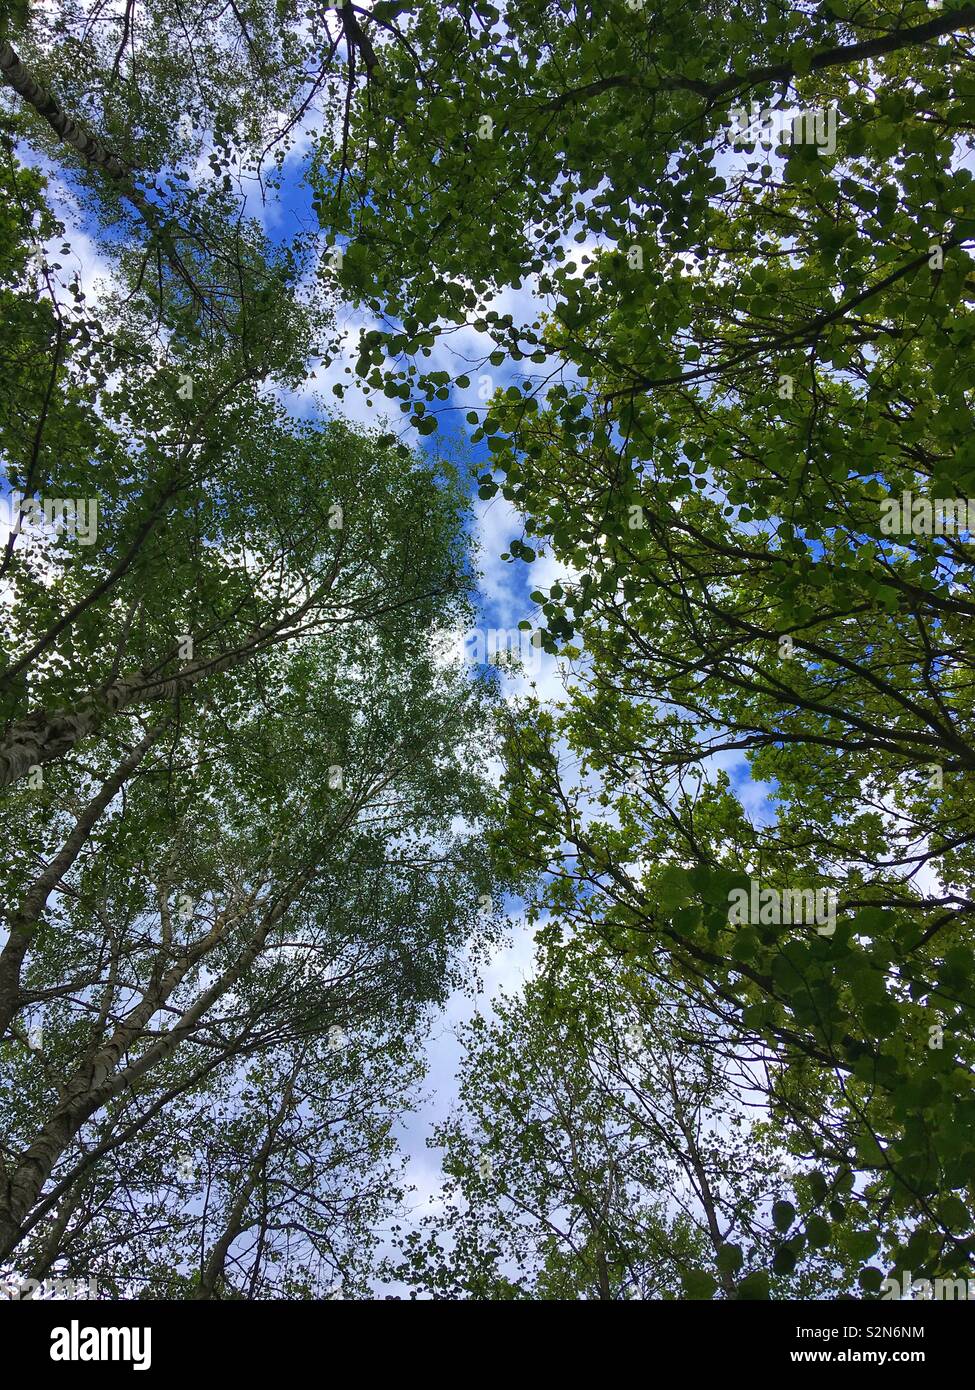 View of blue sky through tree canopy Stock Photo